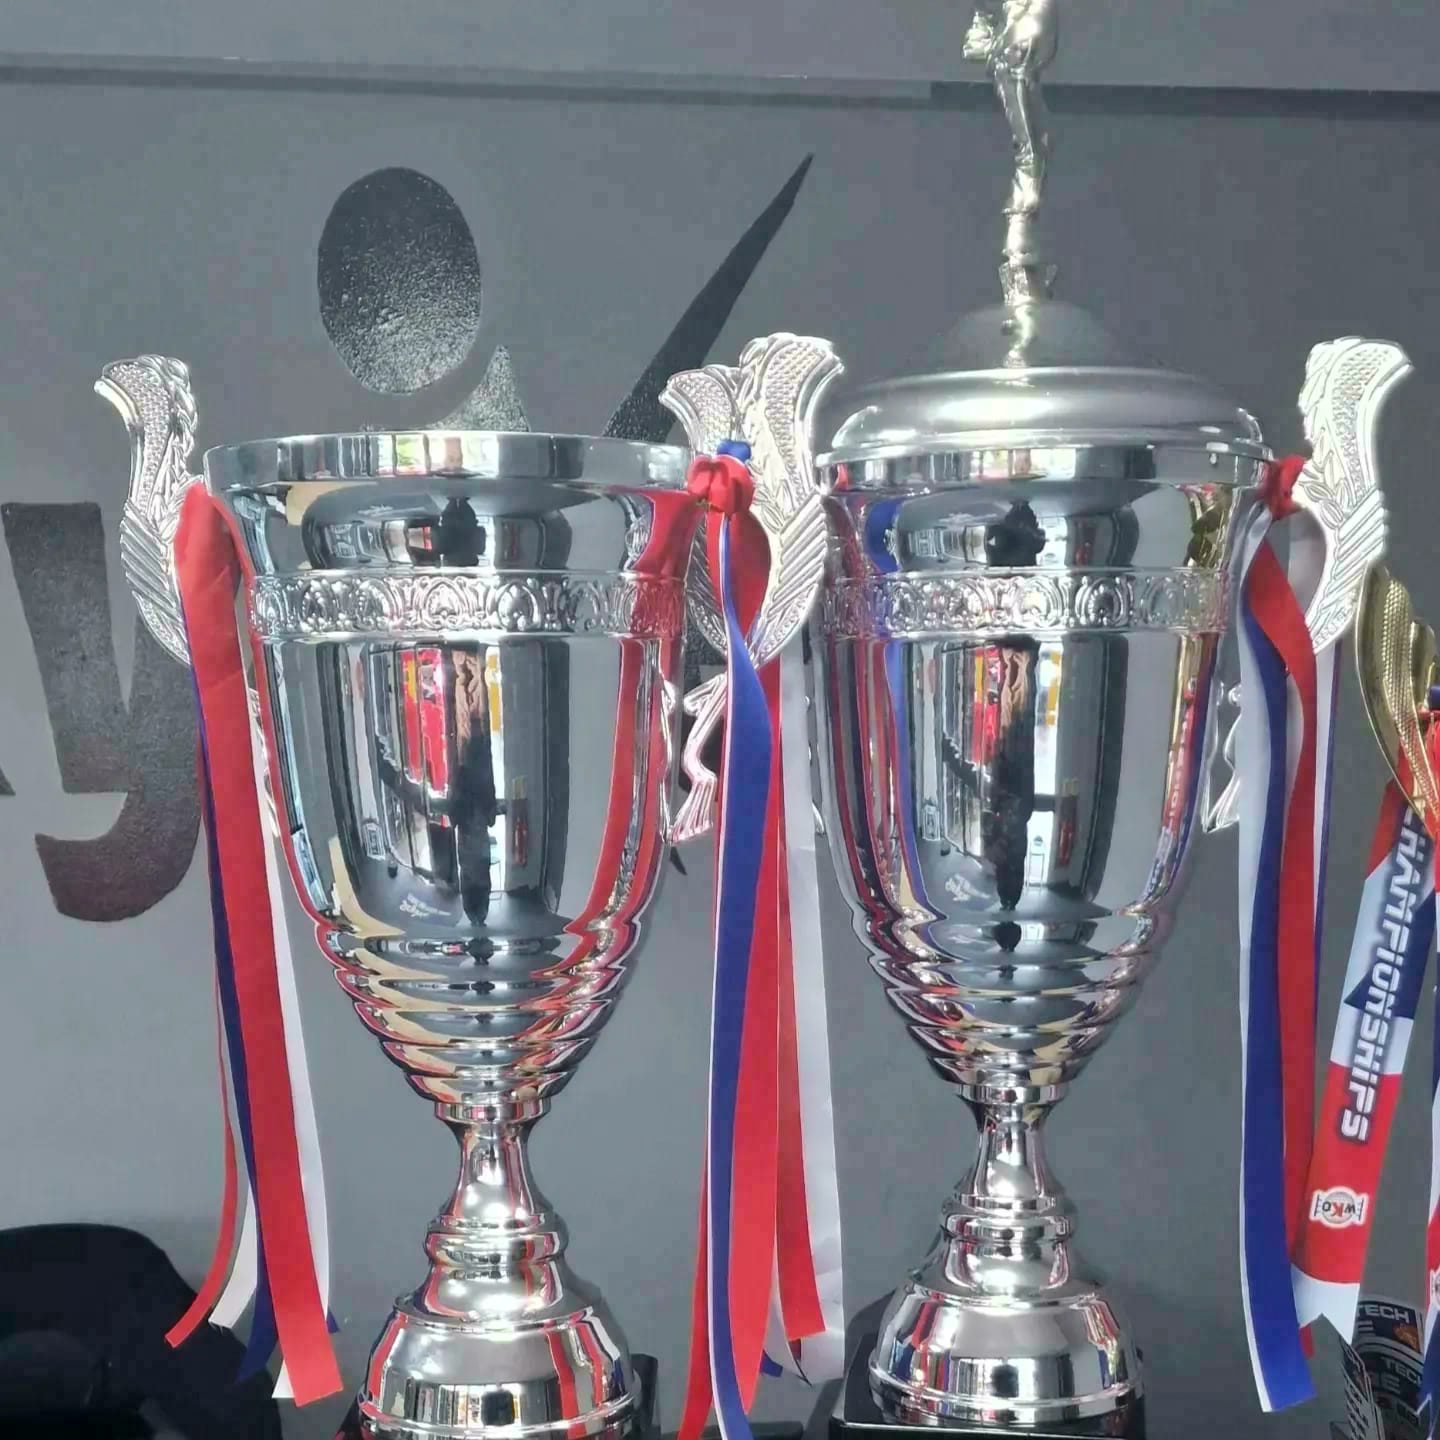 The two trophies the Skyaxe team brought home after their success at the World Kickboxong Organisation Championships.